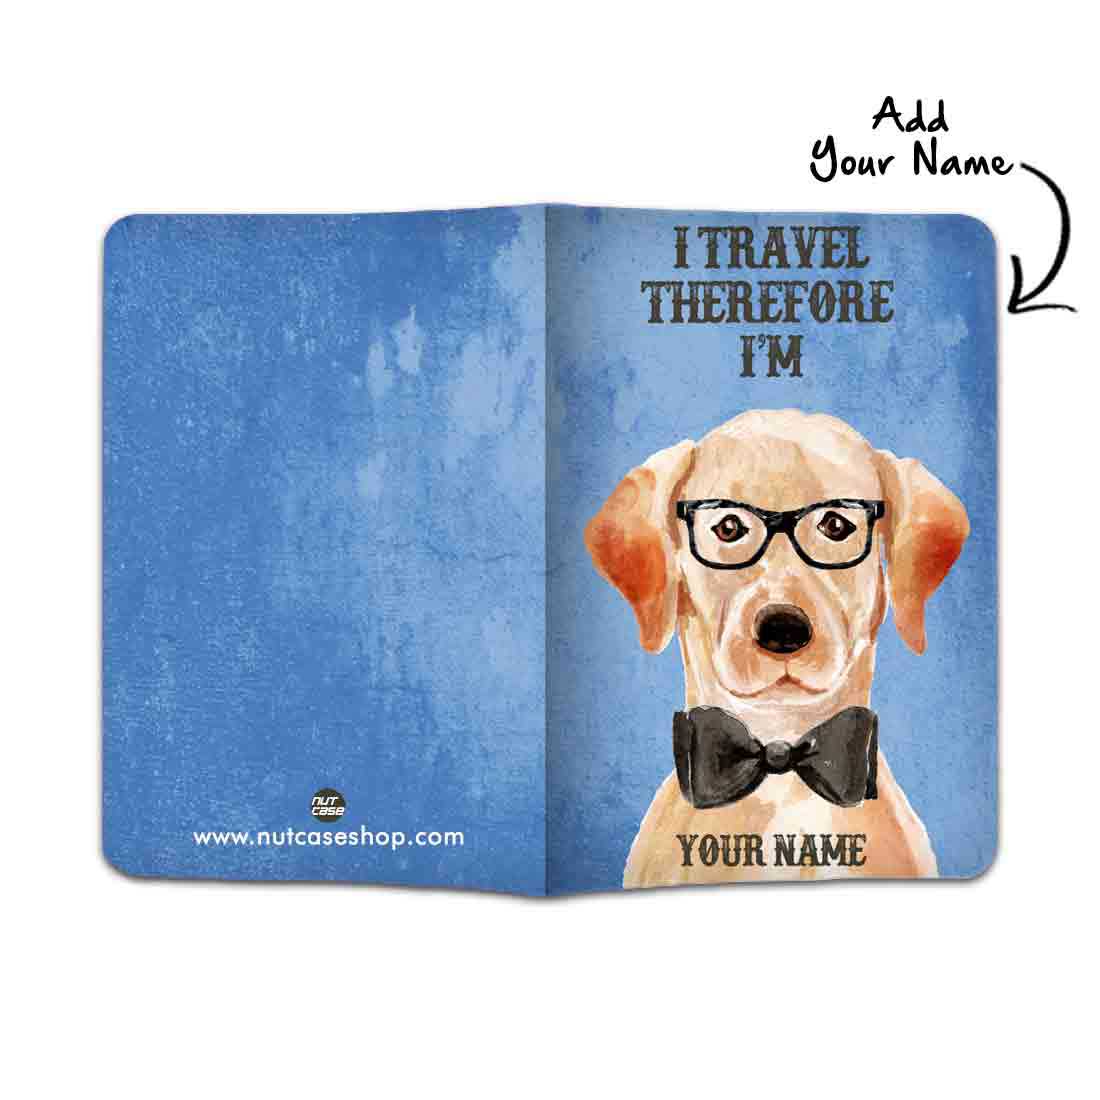 Personalised Passport Cover Travel Luggage Tag - Cute Hipster Dog Nutcase